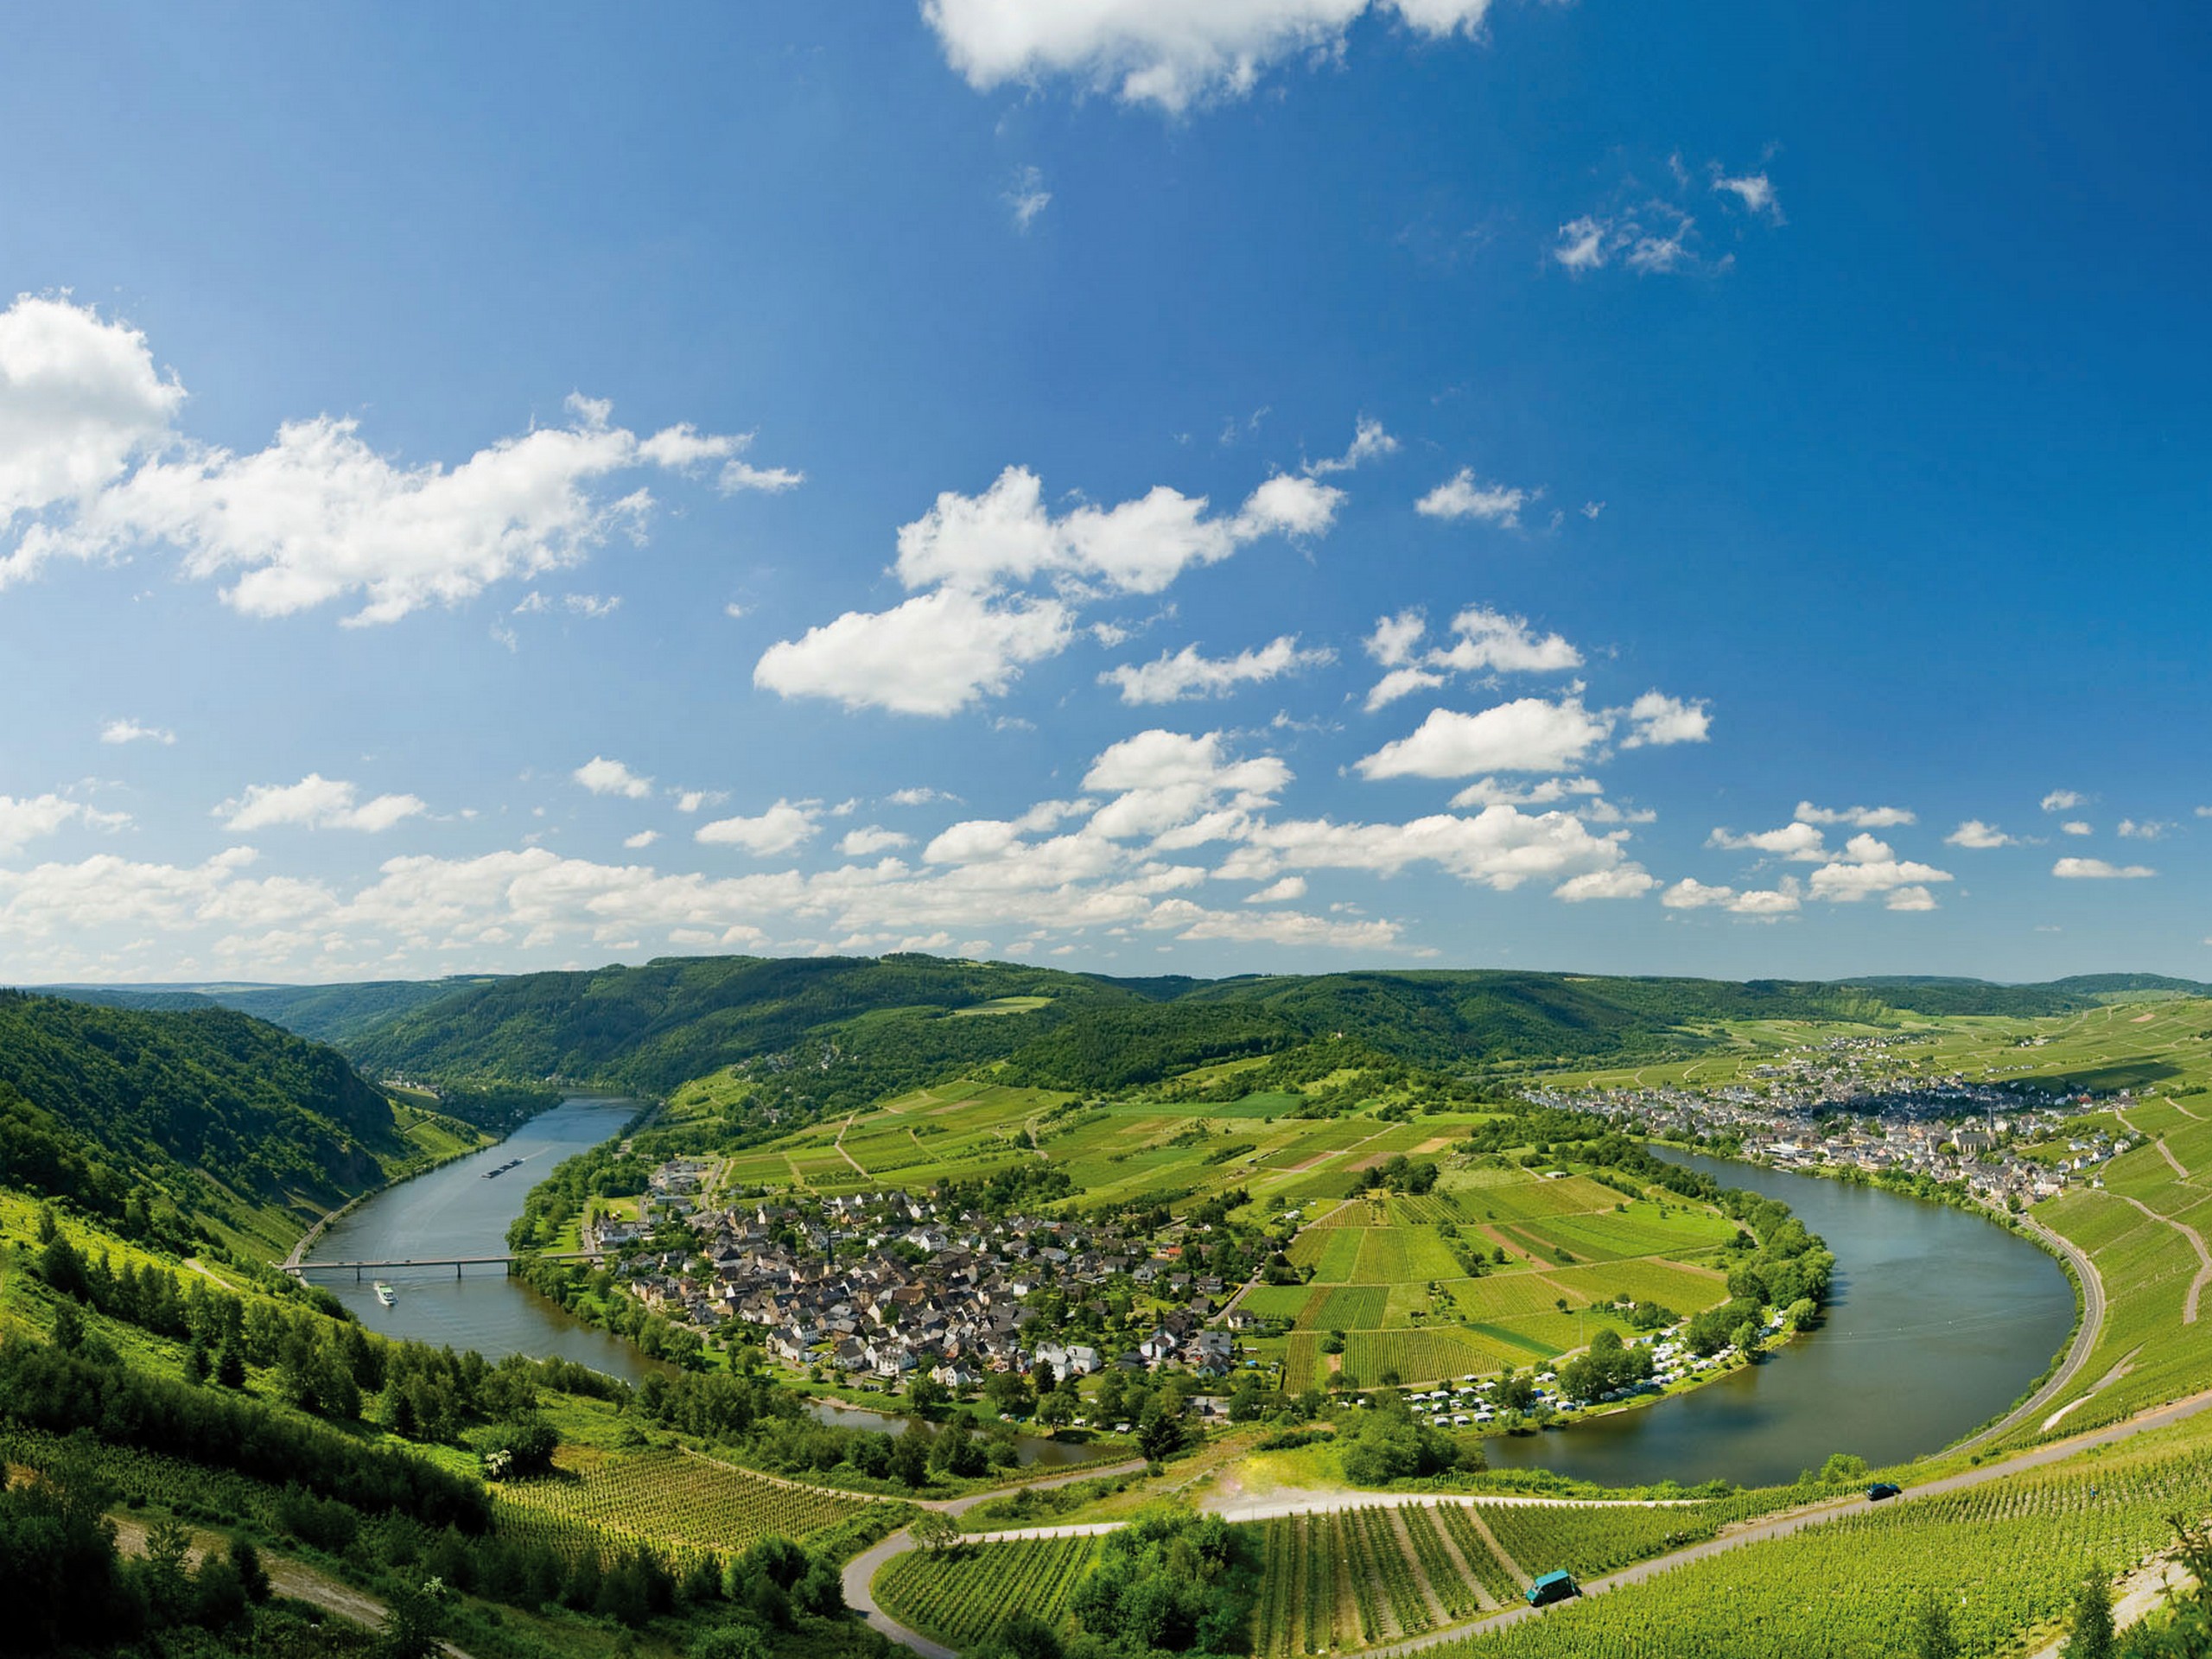 Stunning views seen on a self-guided biking tour along the river in Germany